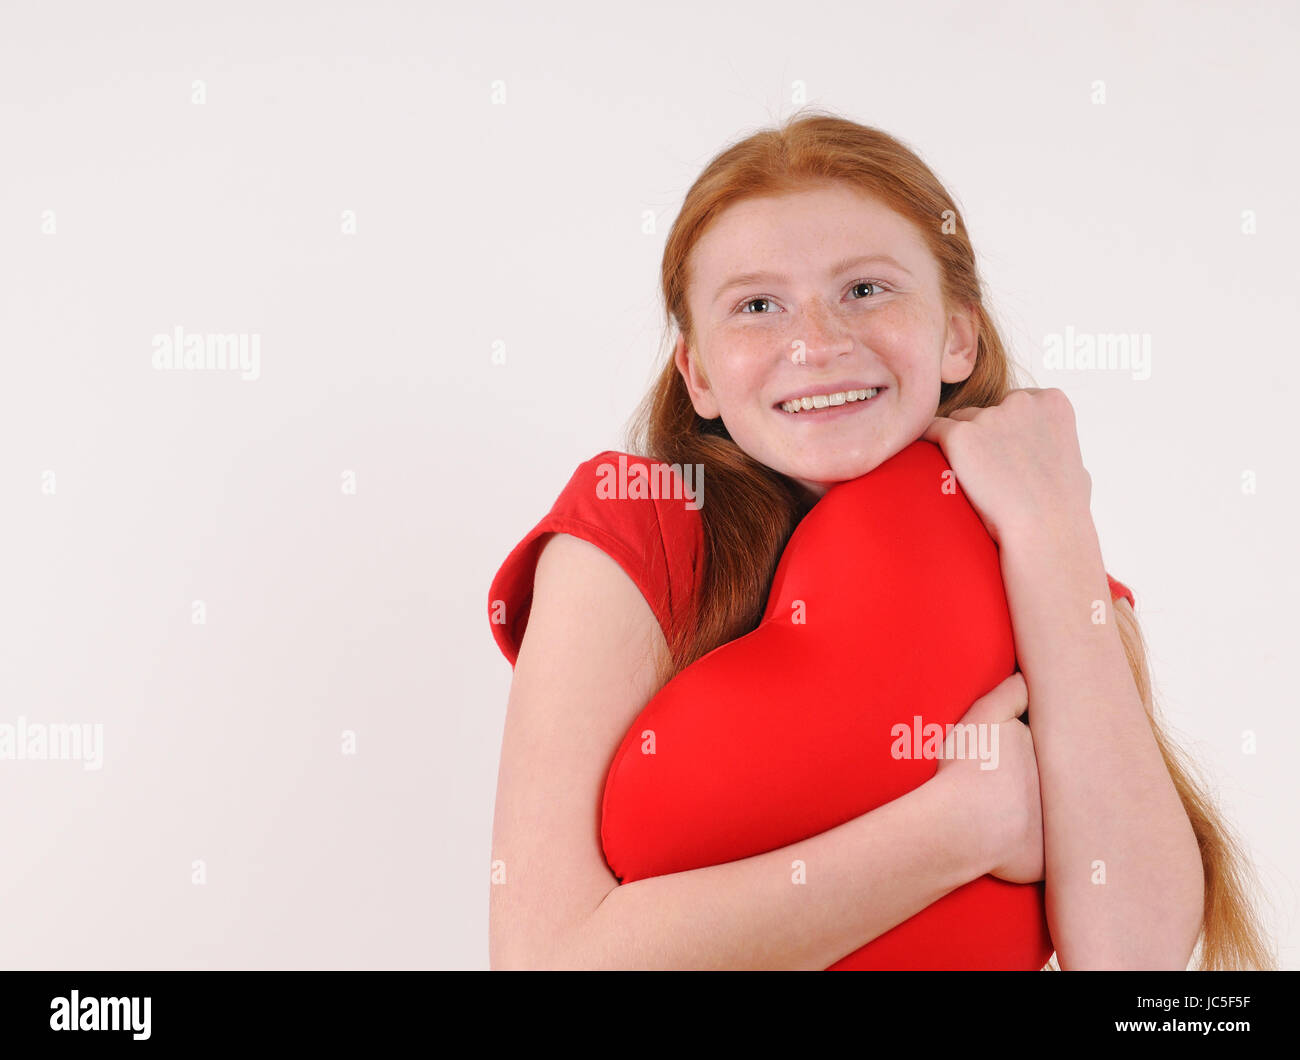 Young red hair girl tenderly hug a heart shape on grey background. Happy smiling lifestyle people concept. Human emotions. Stock Photo